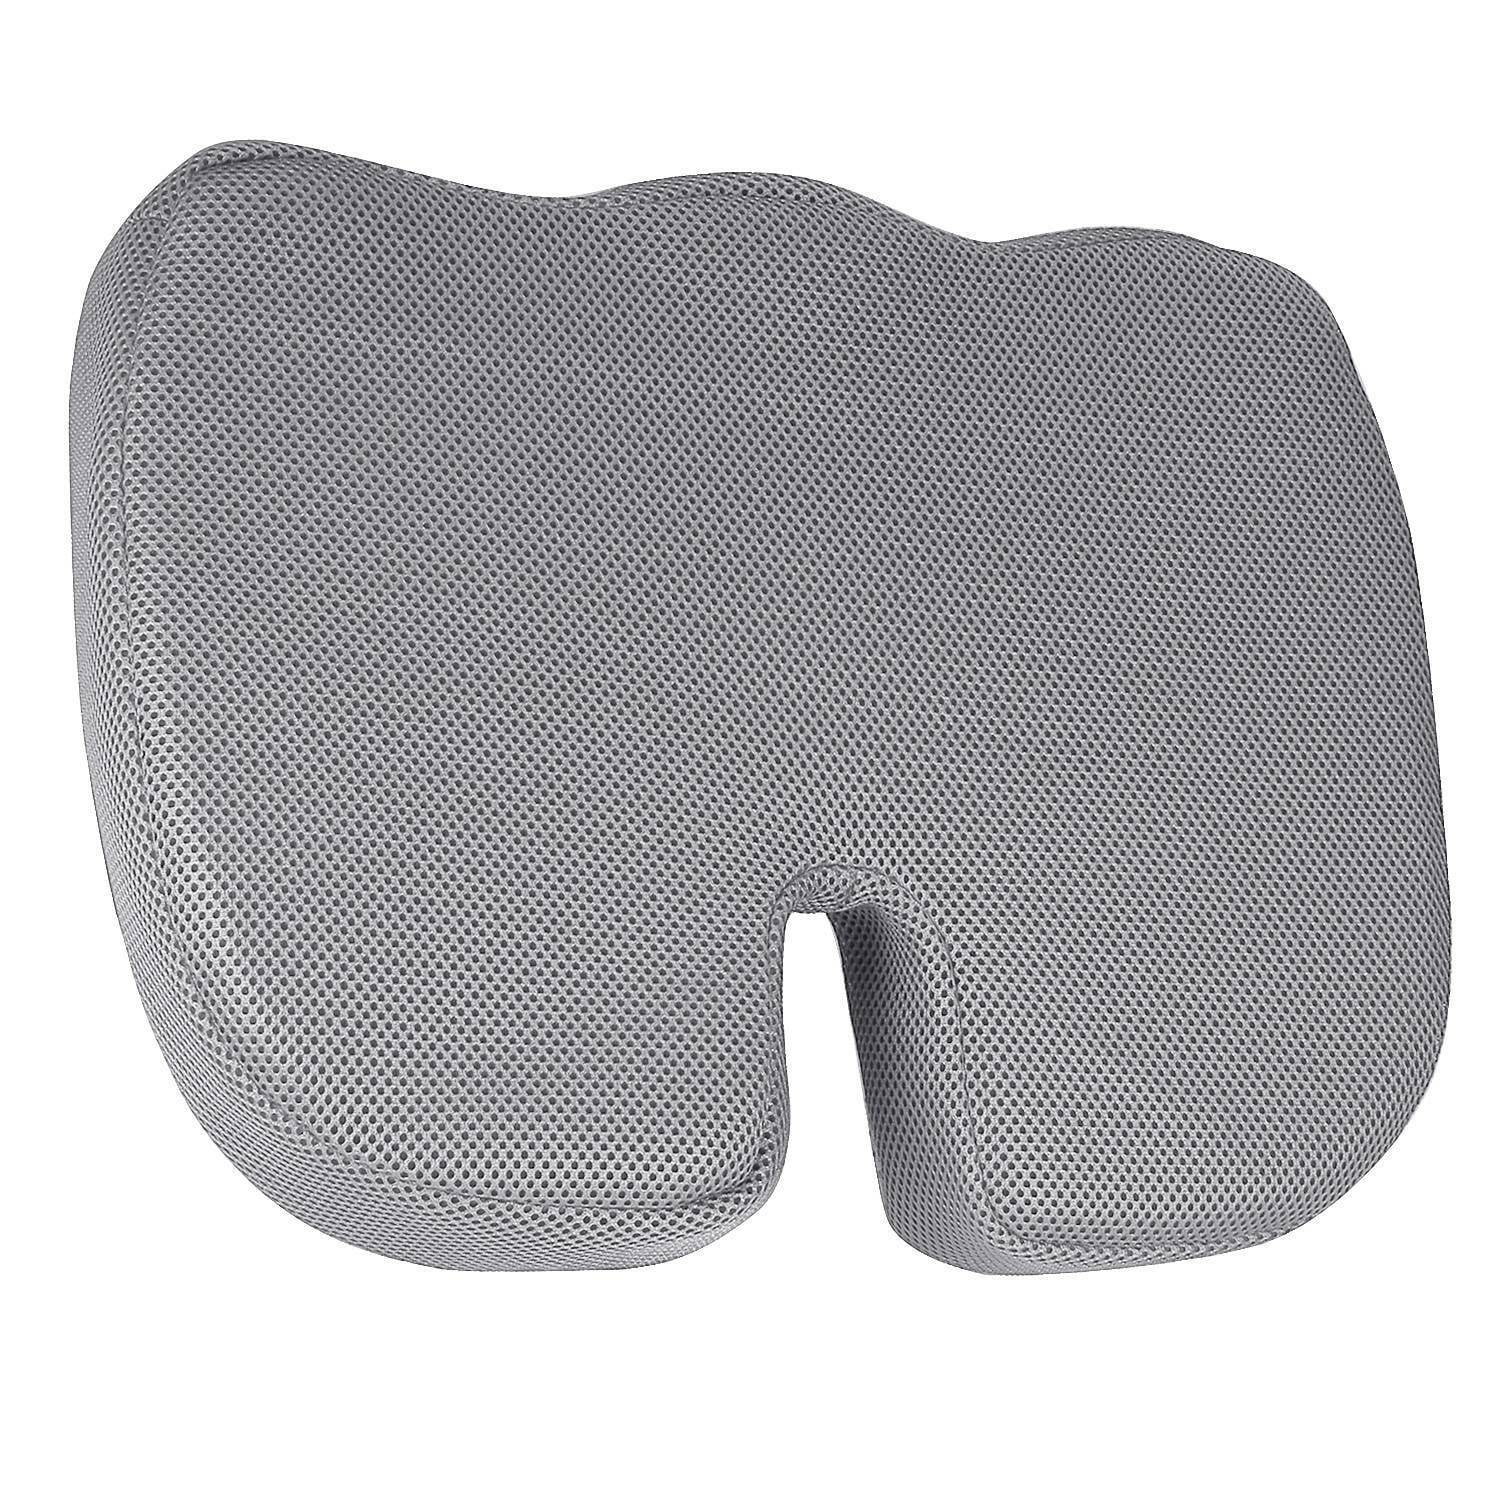 Yohome Car Tailbone Seat Cushion Is used to Relieve Sciatica and Relieve Coccygeal Pain, Size: One size, Gray